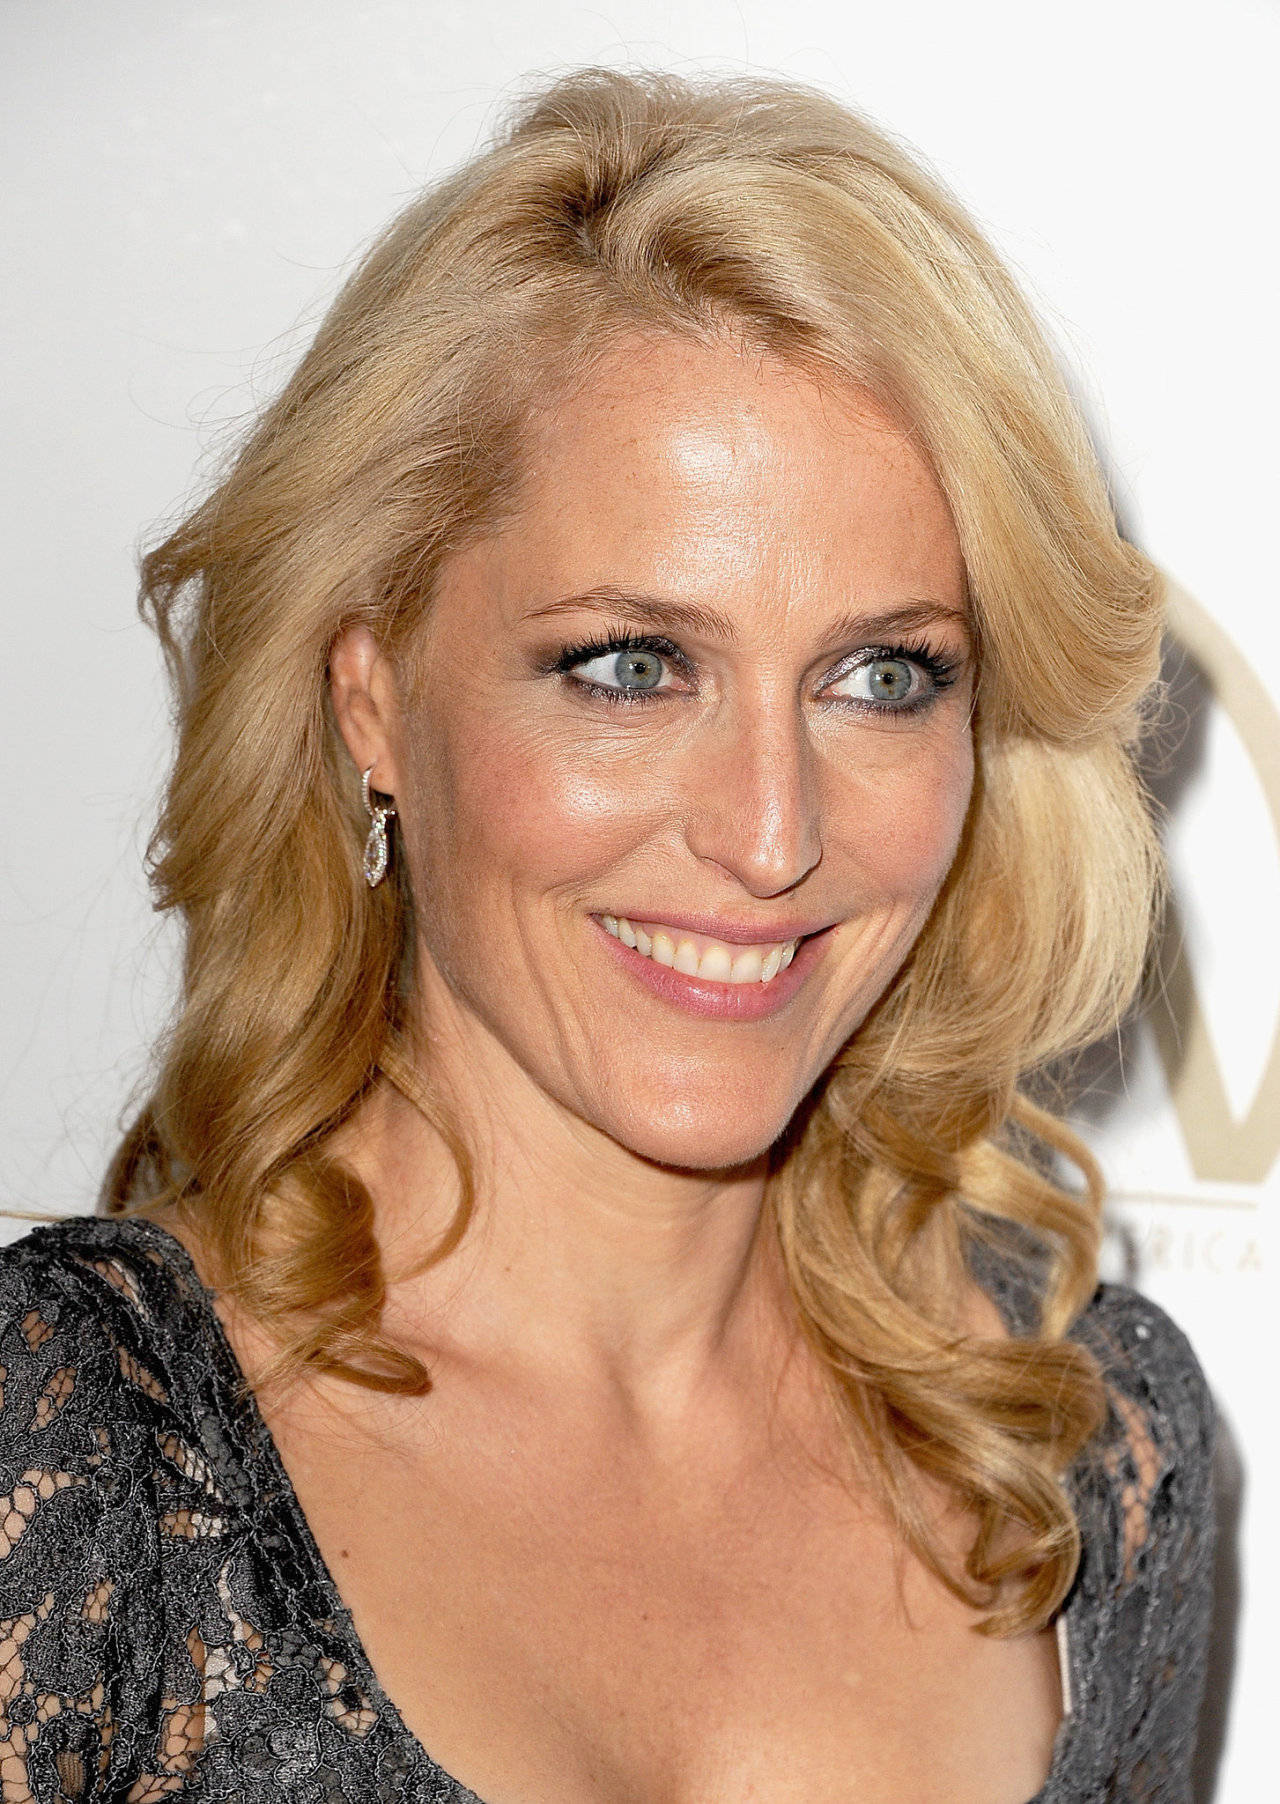 Caption: Gillian Anderson Showcasing A Curly Blonde Hairstyle. Background